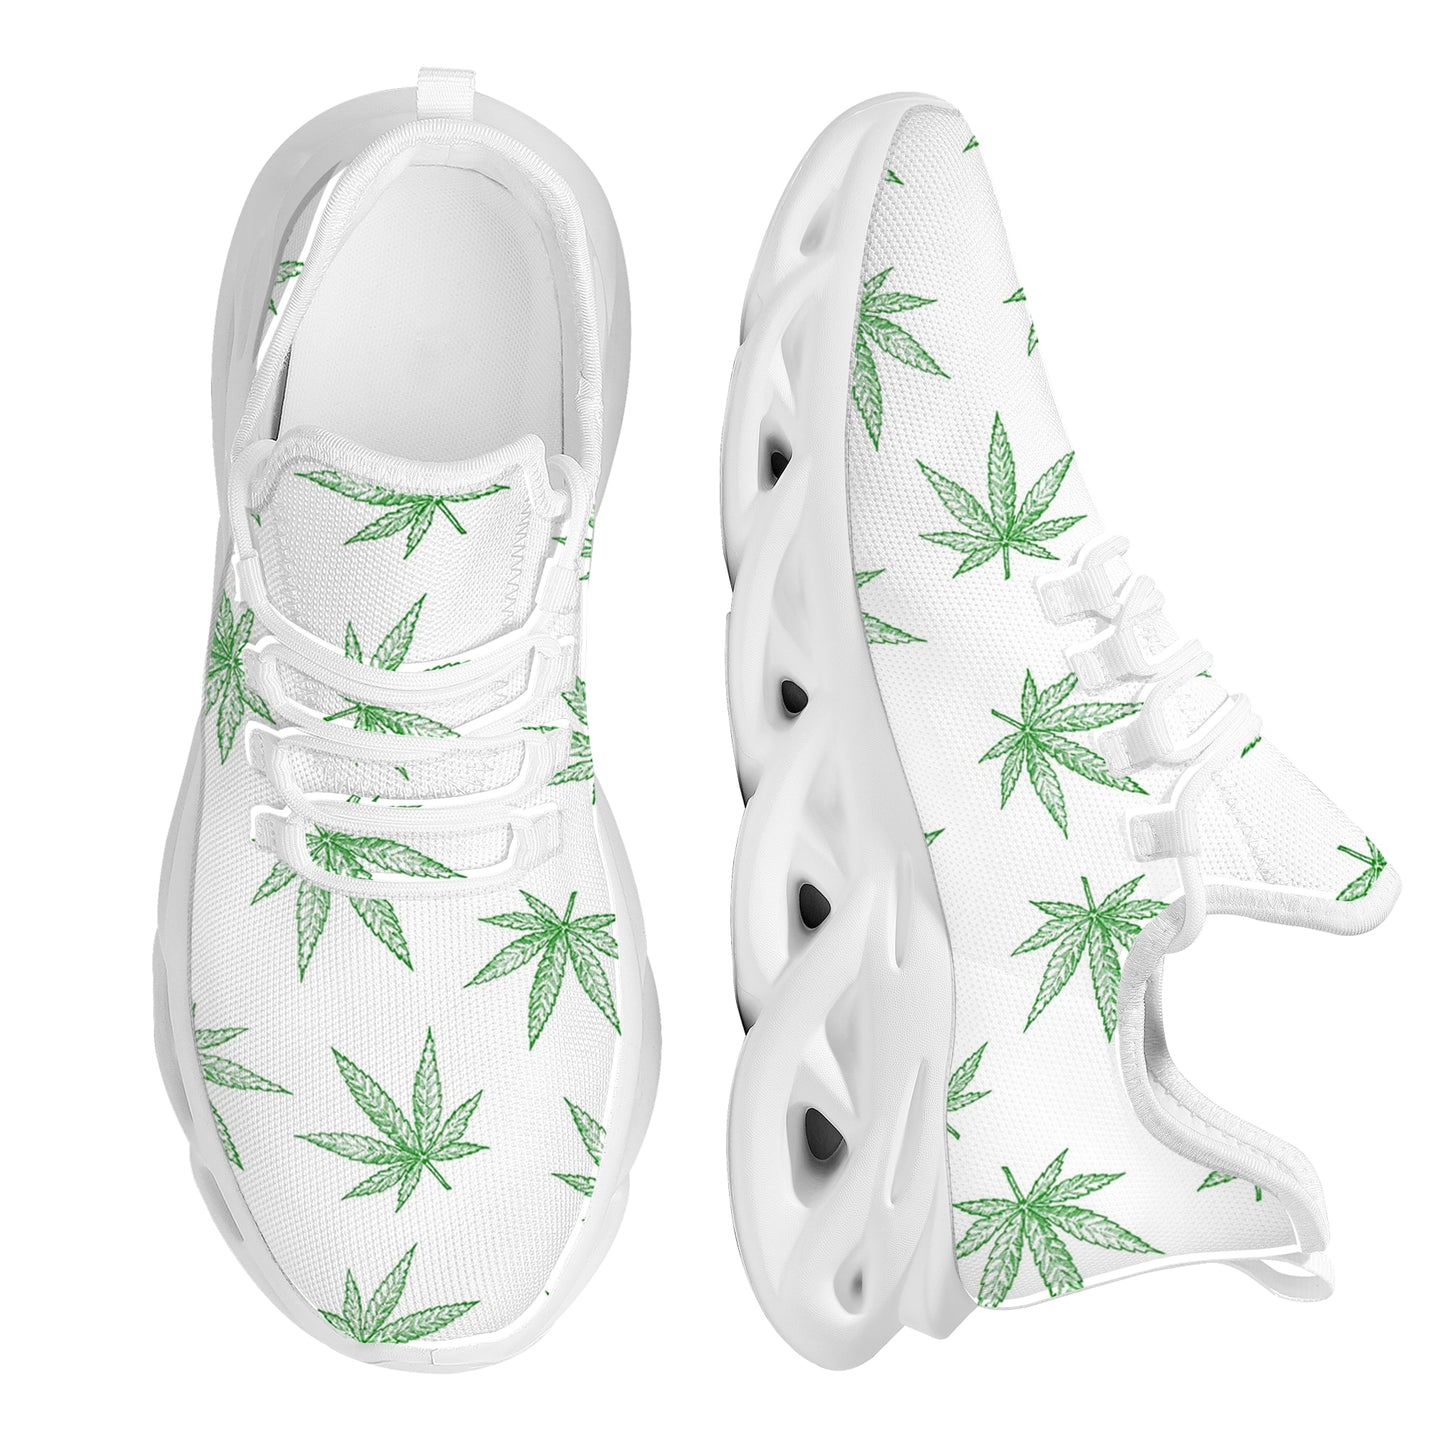 Assorted Colorful 3D Weed Leaves Women's Breathable Lace-up Platform Sneakers